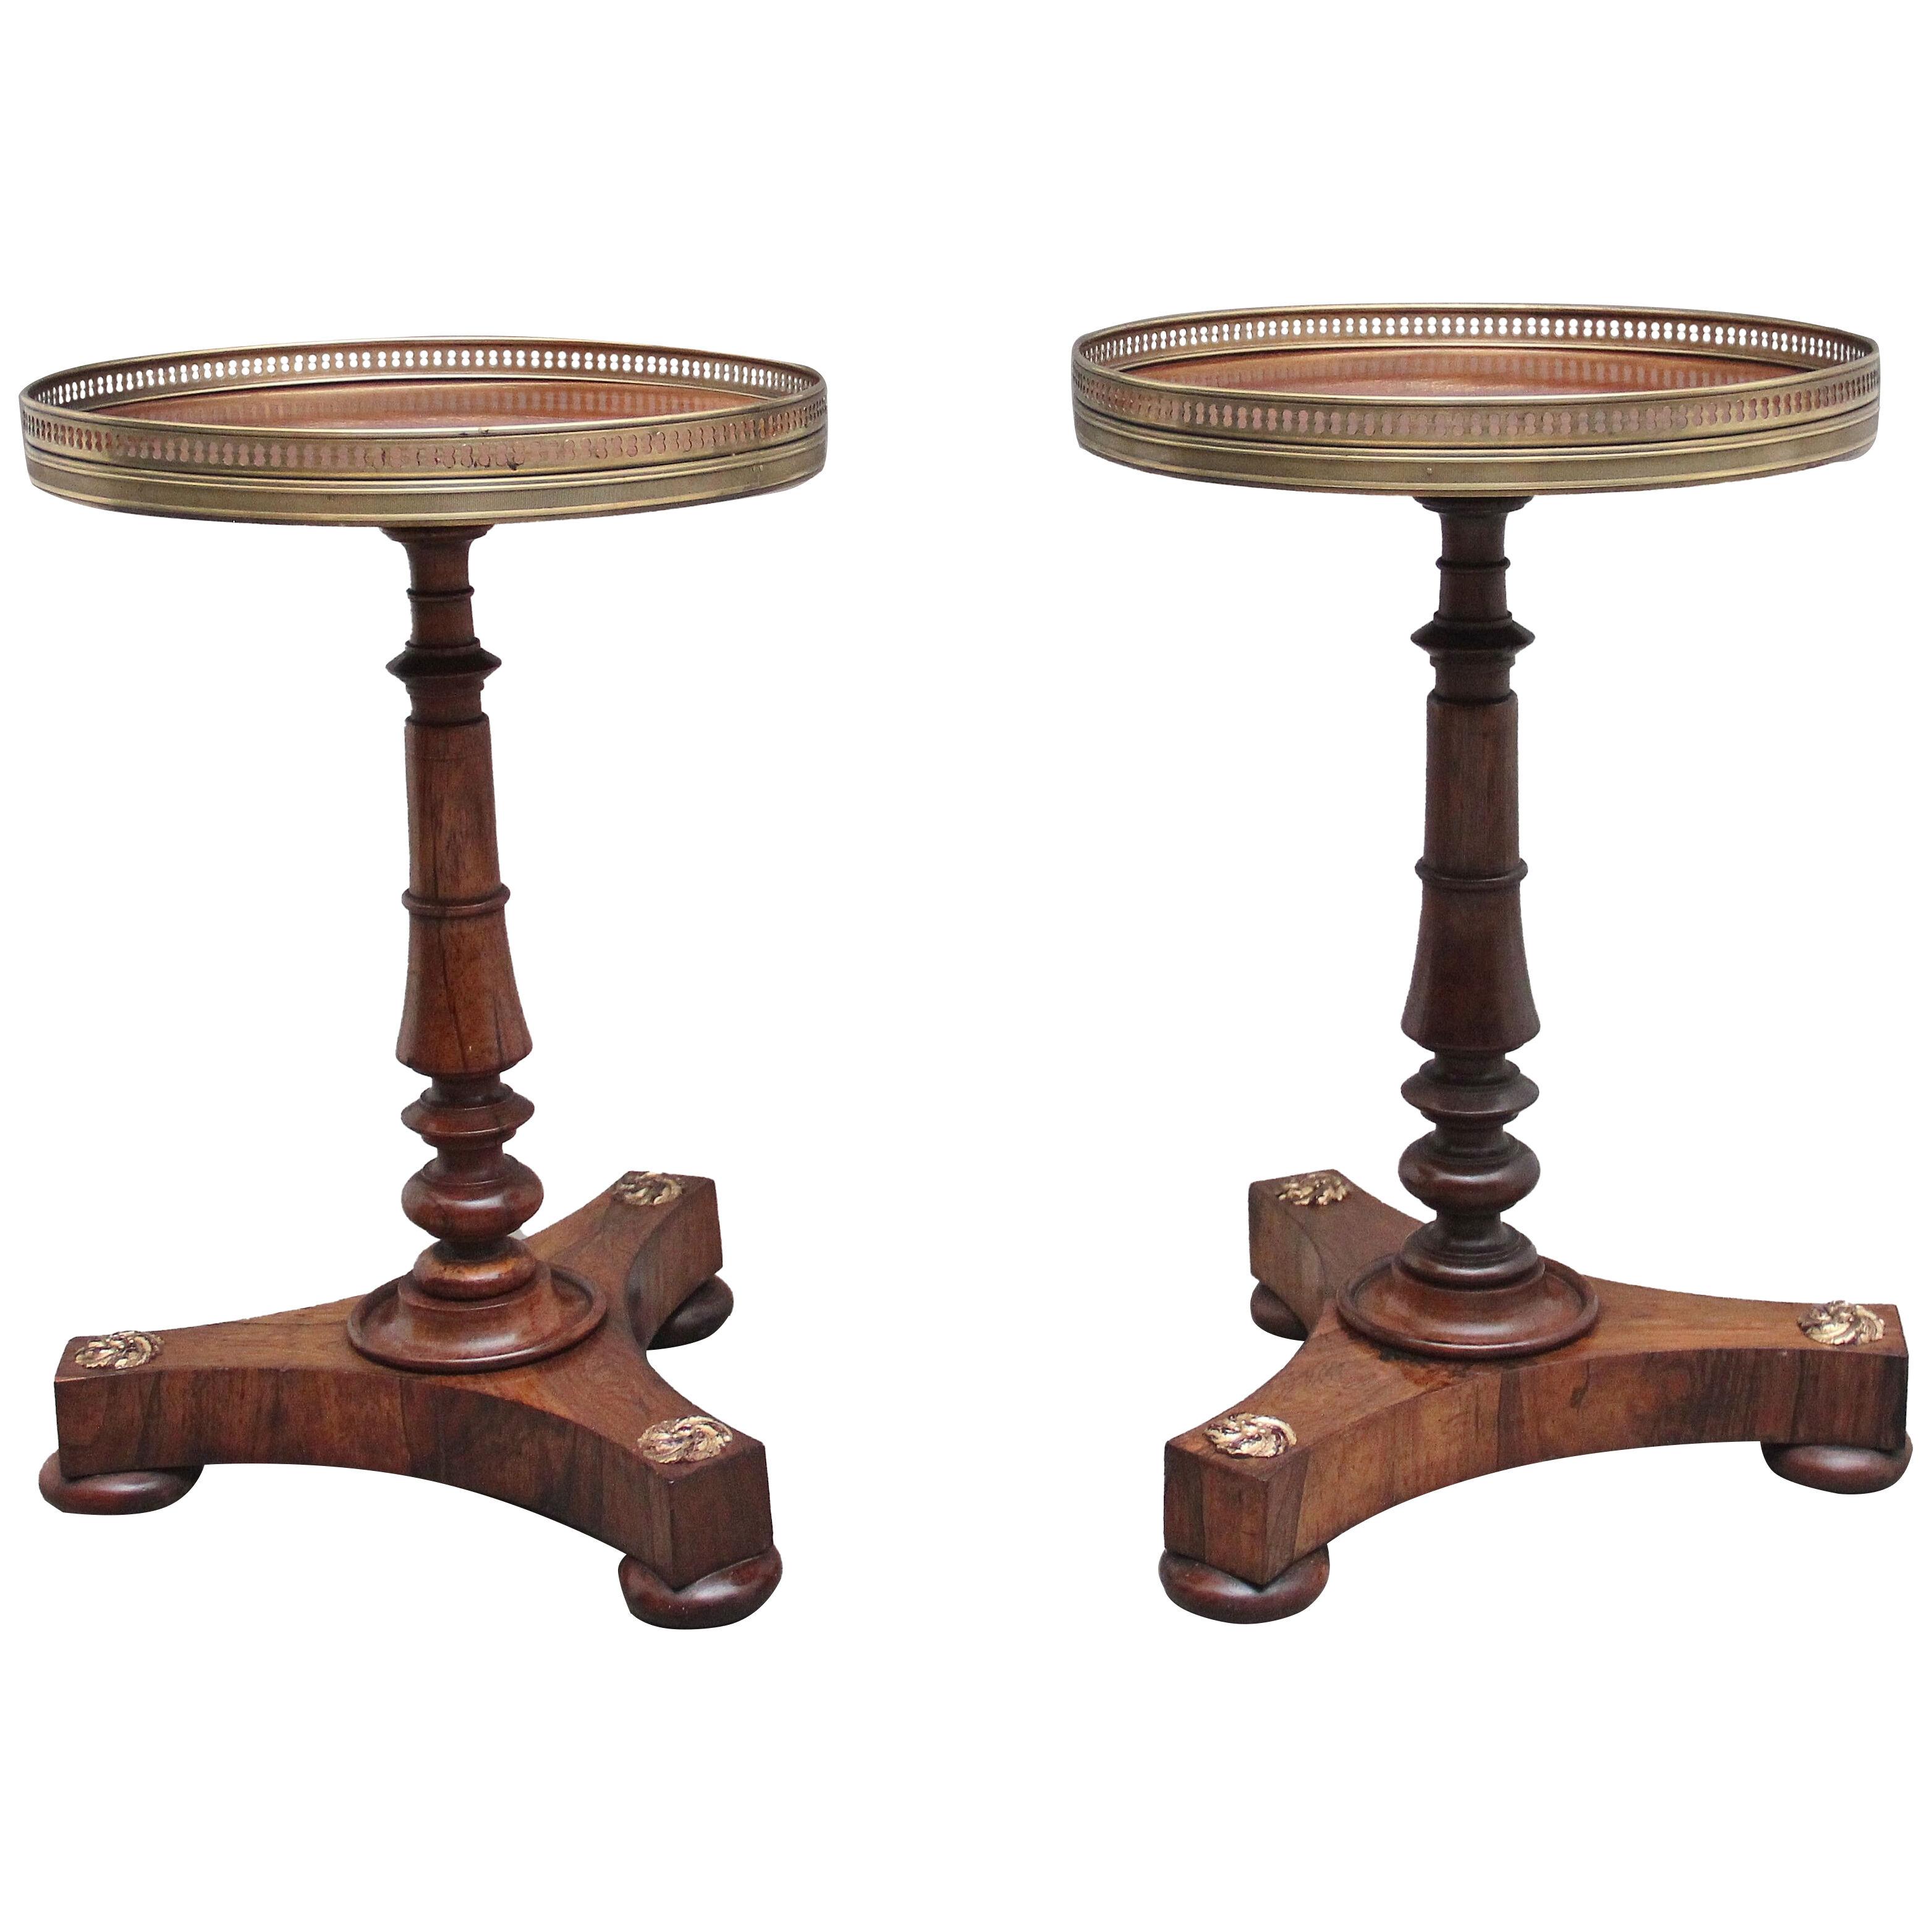 A decorative pair of early 19th Century rosewood occasional tables